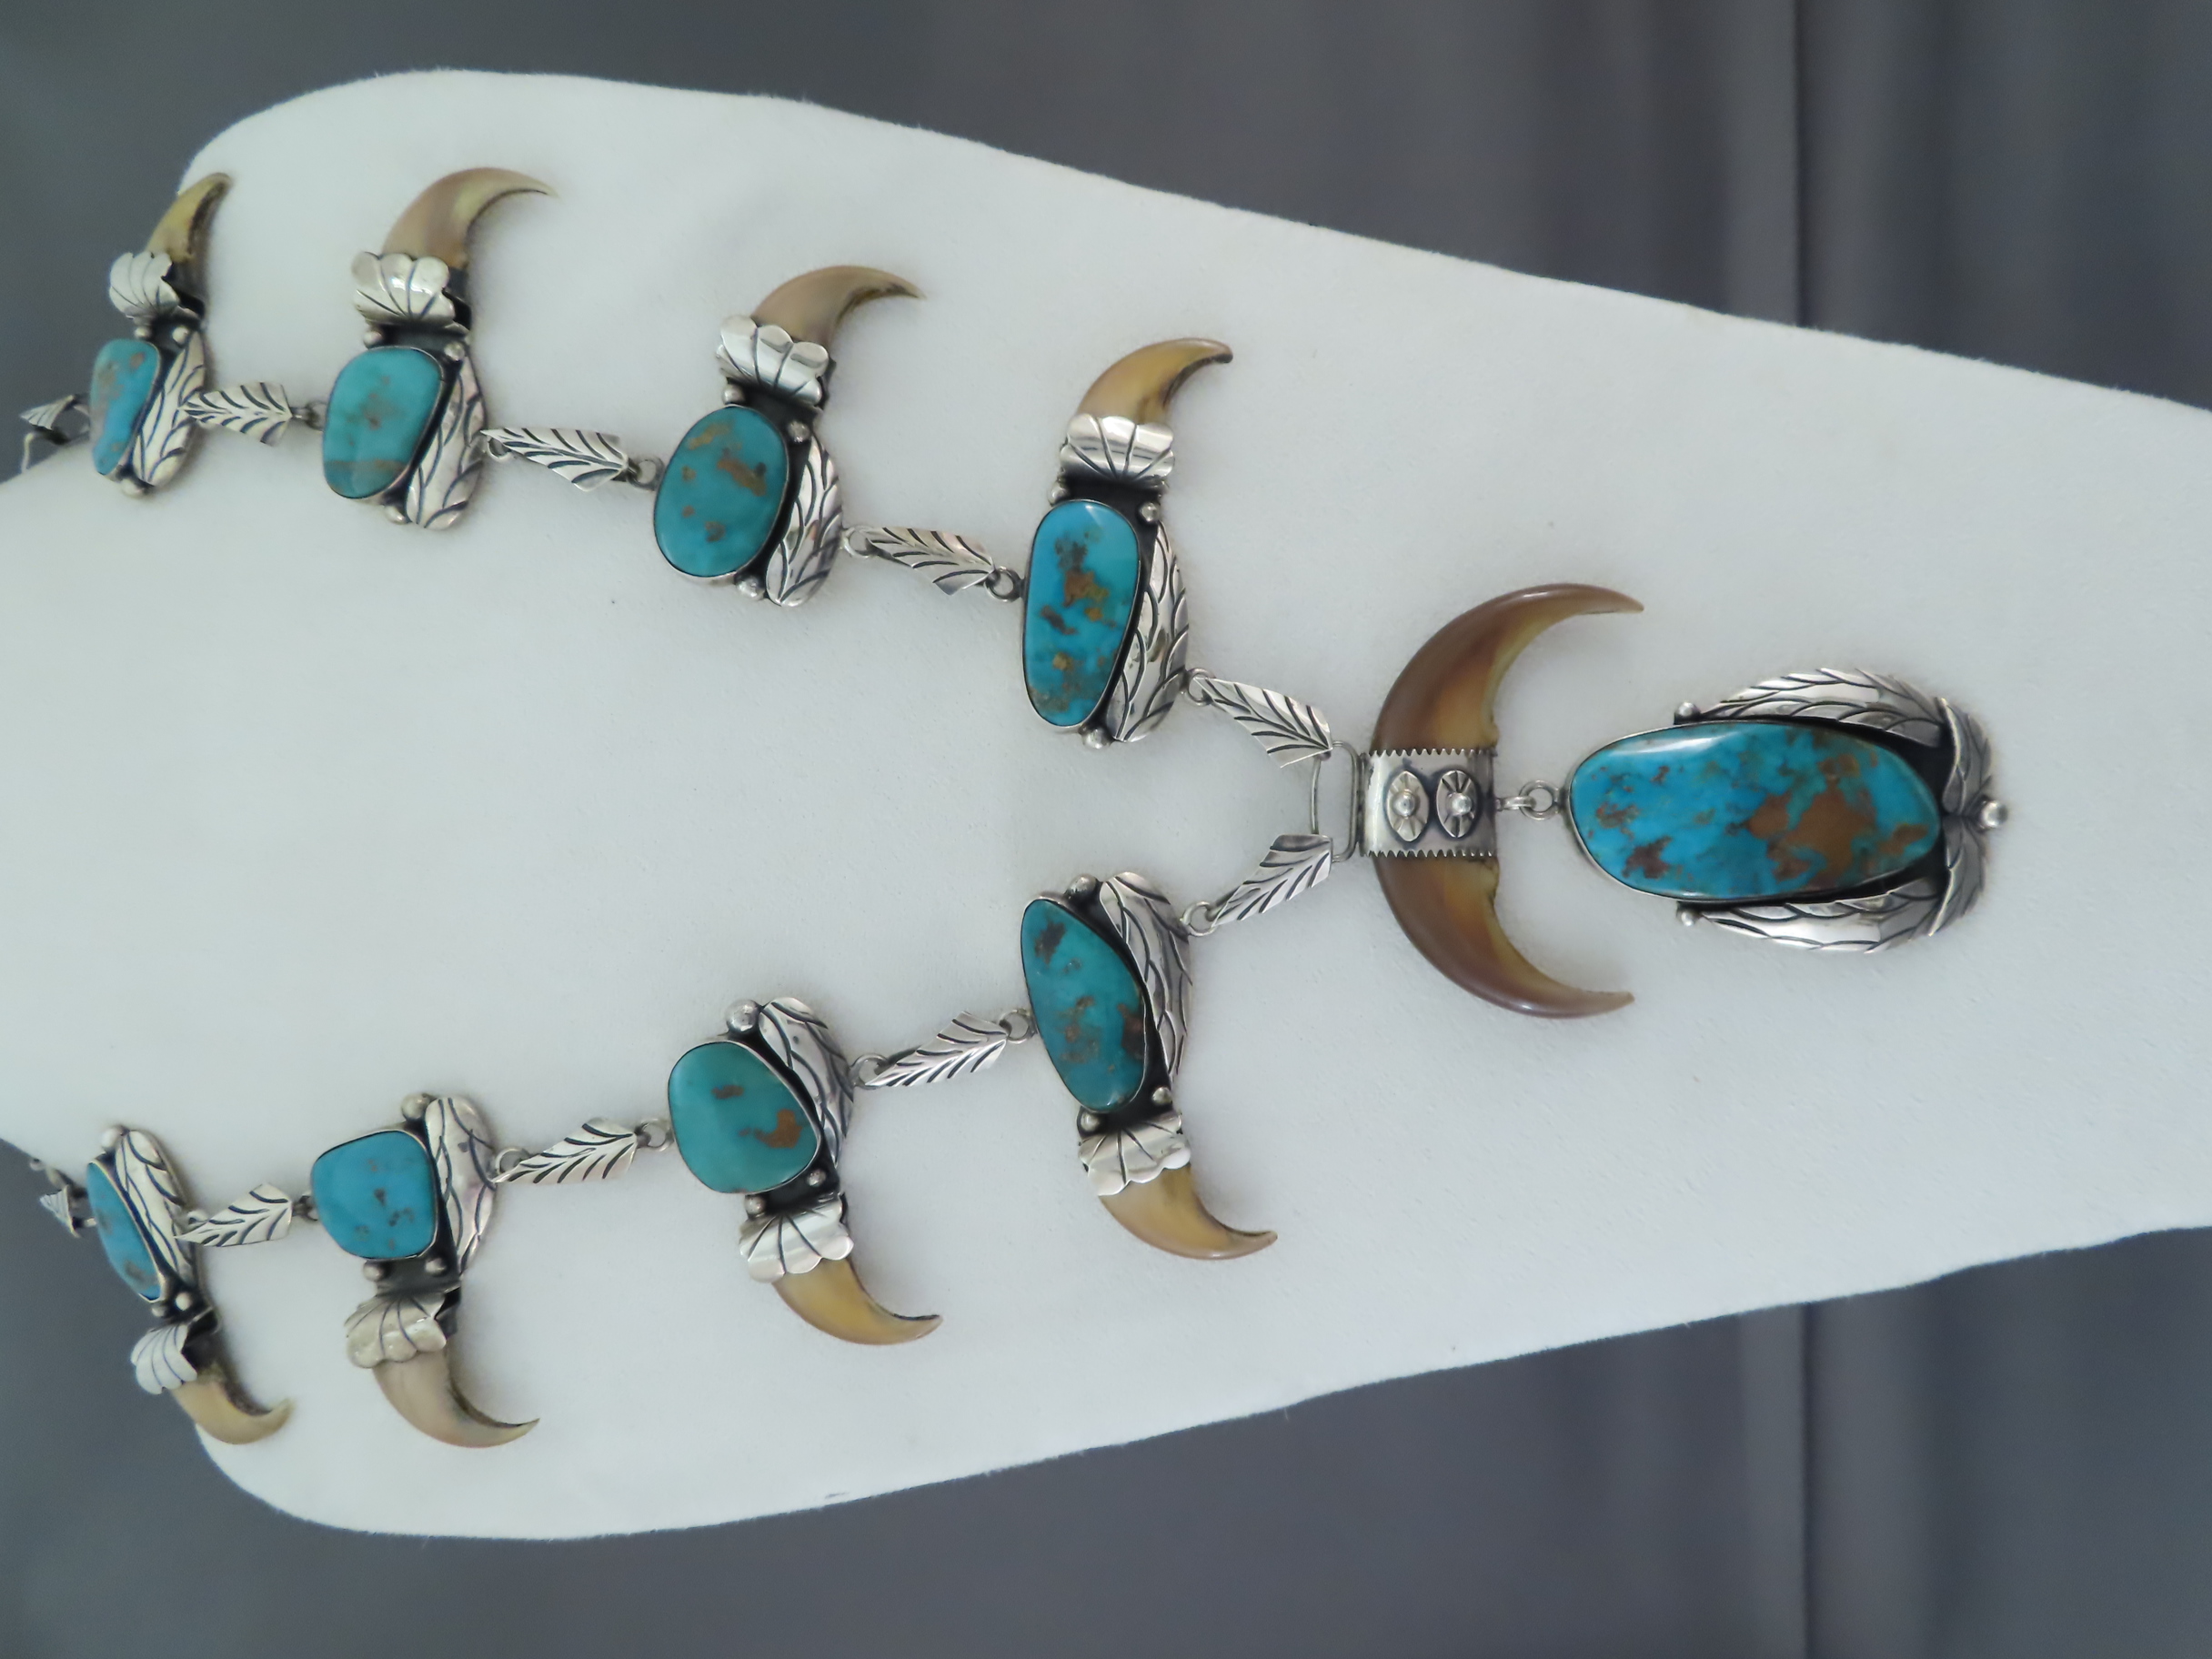 Vintage Squash Blossom Necklace with Blue Gem Turquoise & Bear Claws